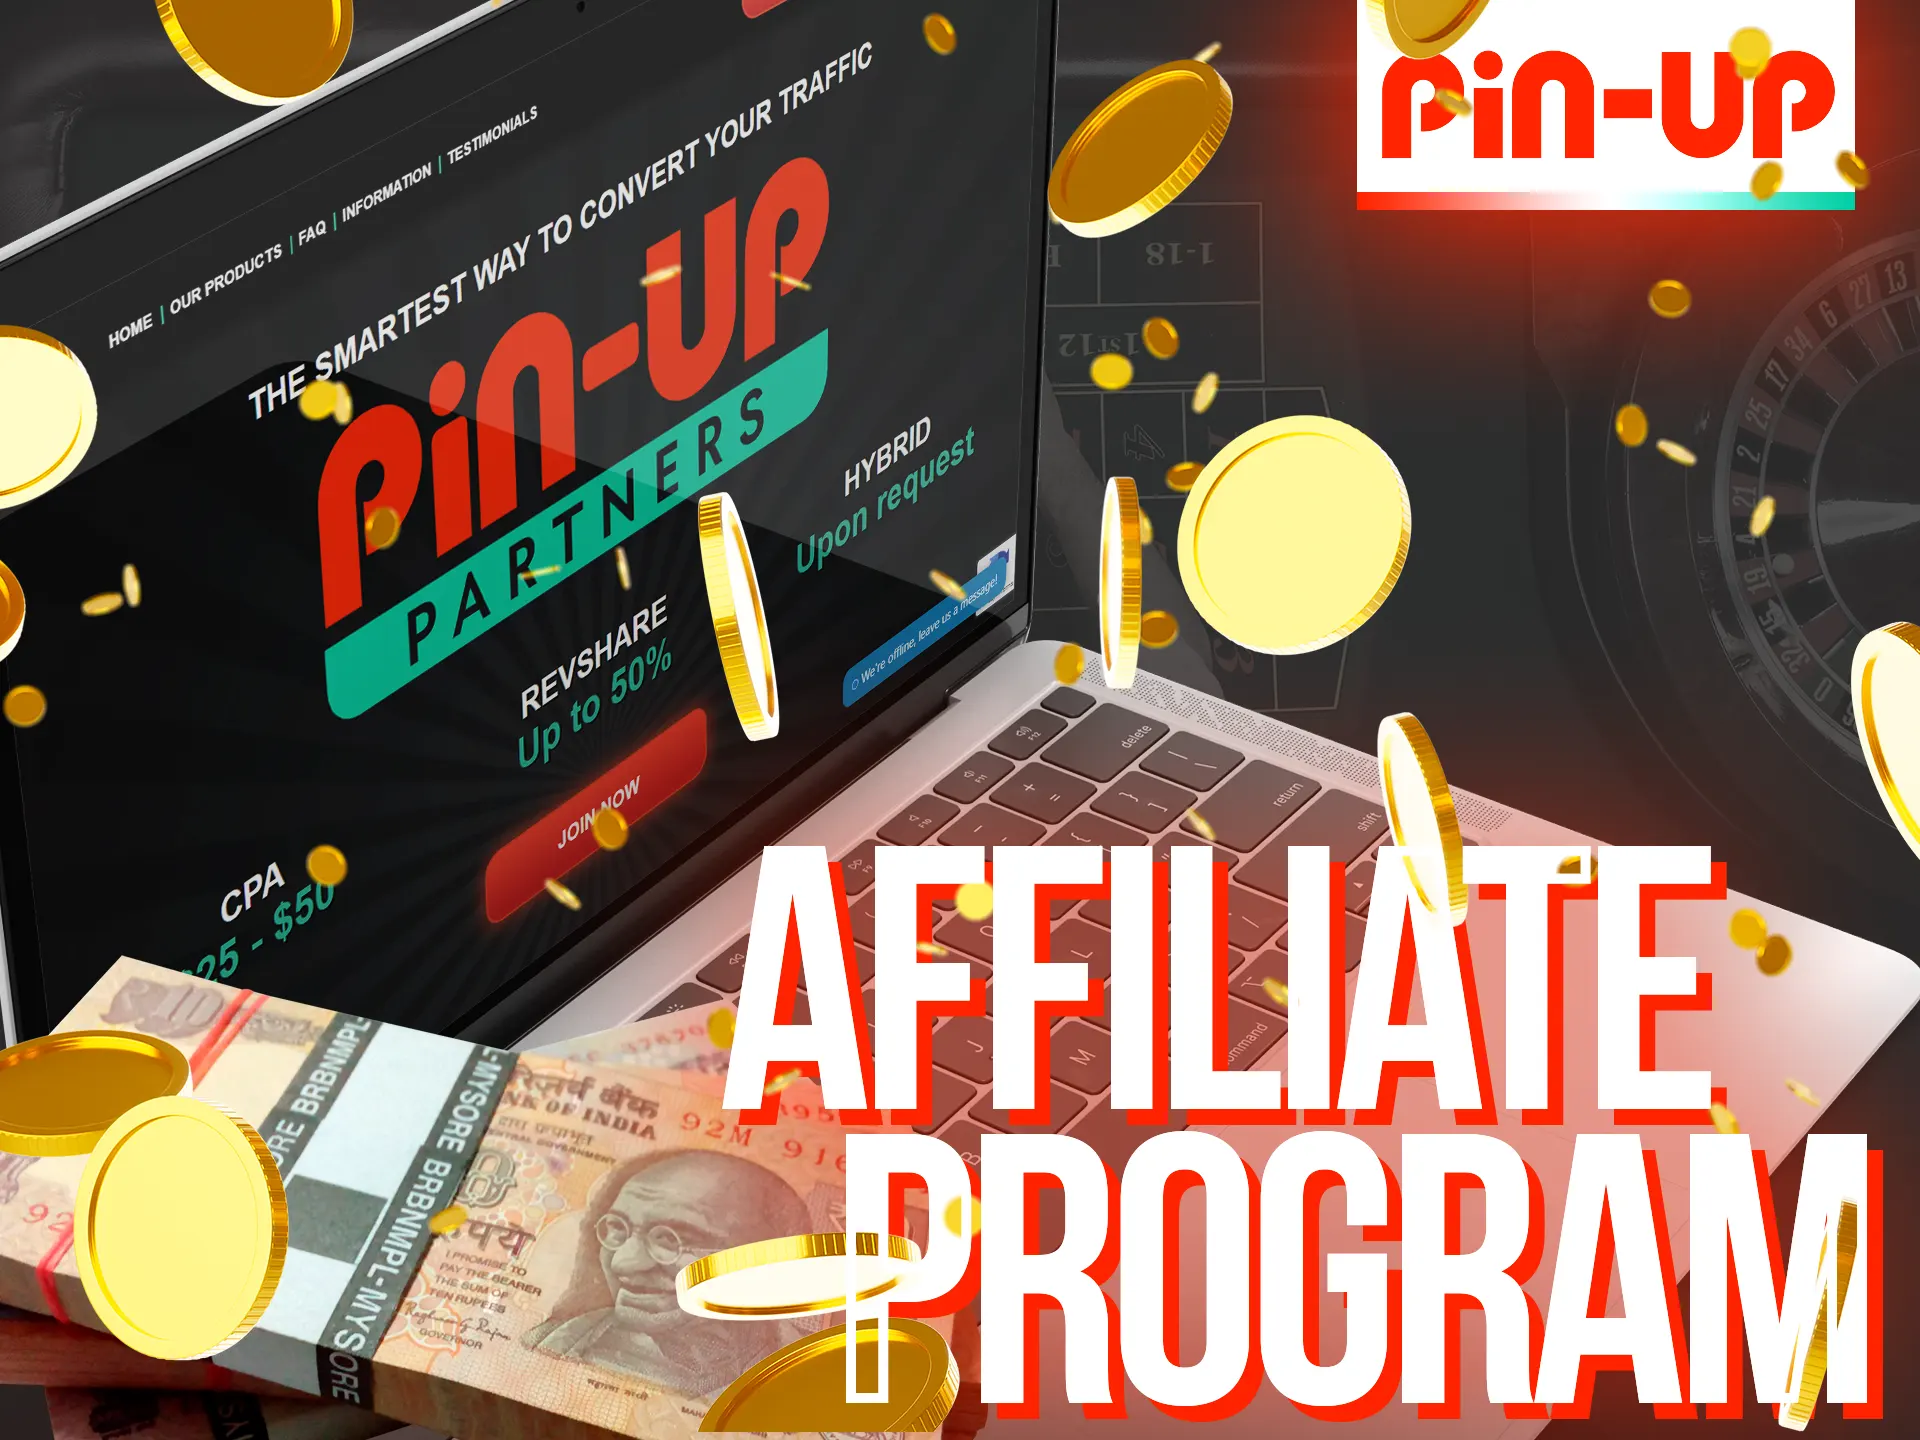 Become partners of Pin-Up online casino.